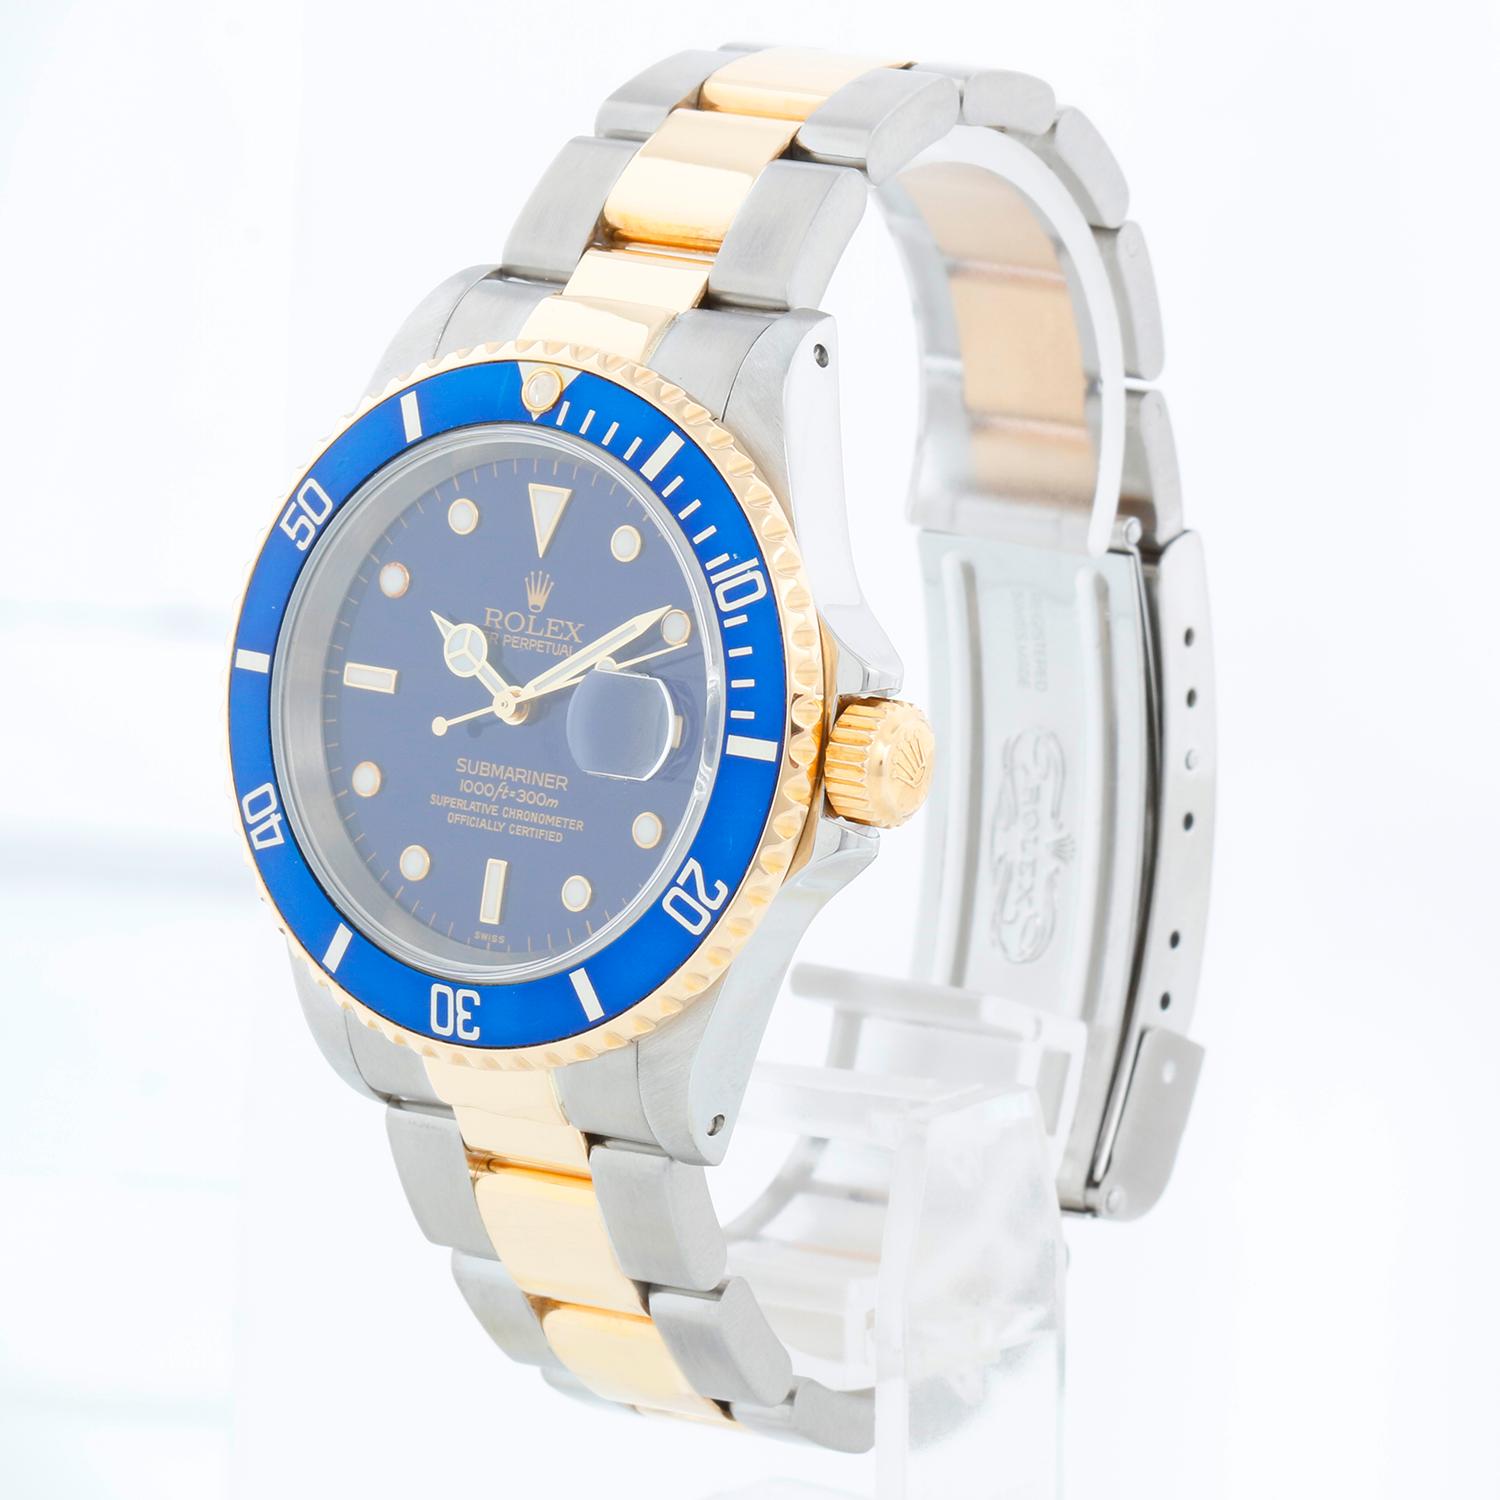 Rolex Submariner 2-Tone Steel & Gold Men's Watch 16613 - Automatic winding, 31 jewels, pressure proof to 1,000 feet. Stainless steel case with 18k yellow gold bezel . Blue dial with luminous markers; date at 3 o'clock. Stainless steel and 18k yellow